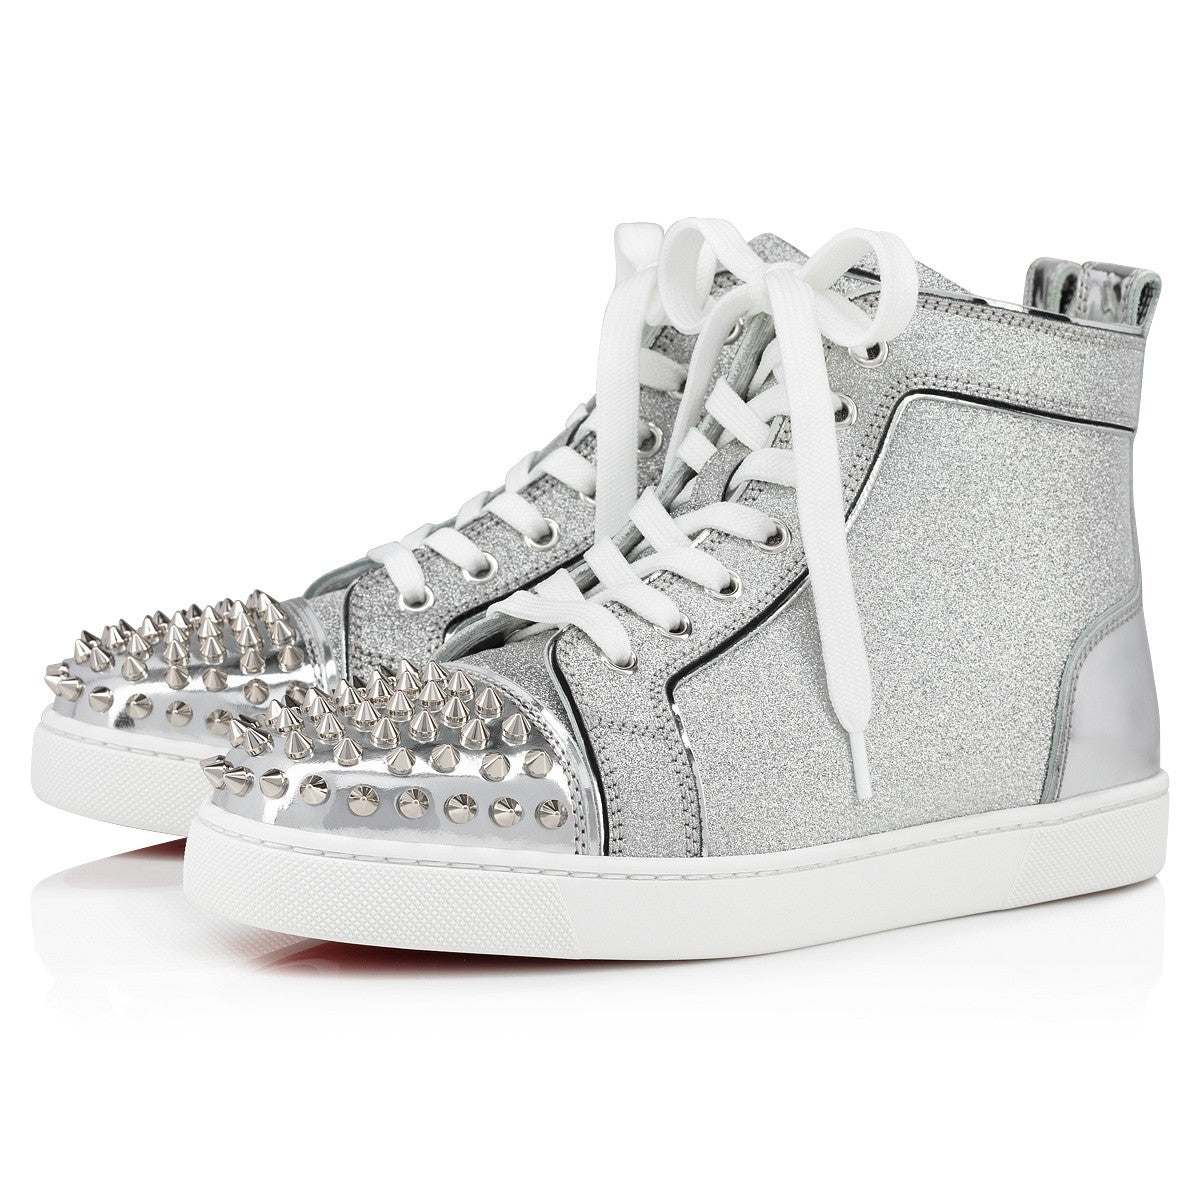 Lou Spikes Woman Specchio Leather and Glittered Calf Leather Silver High-top Sneakers